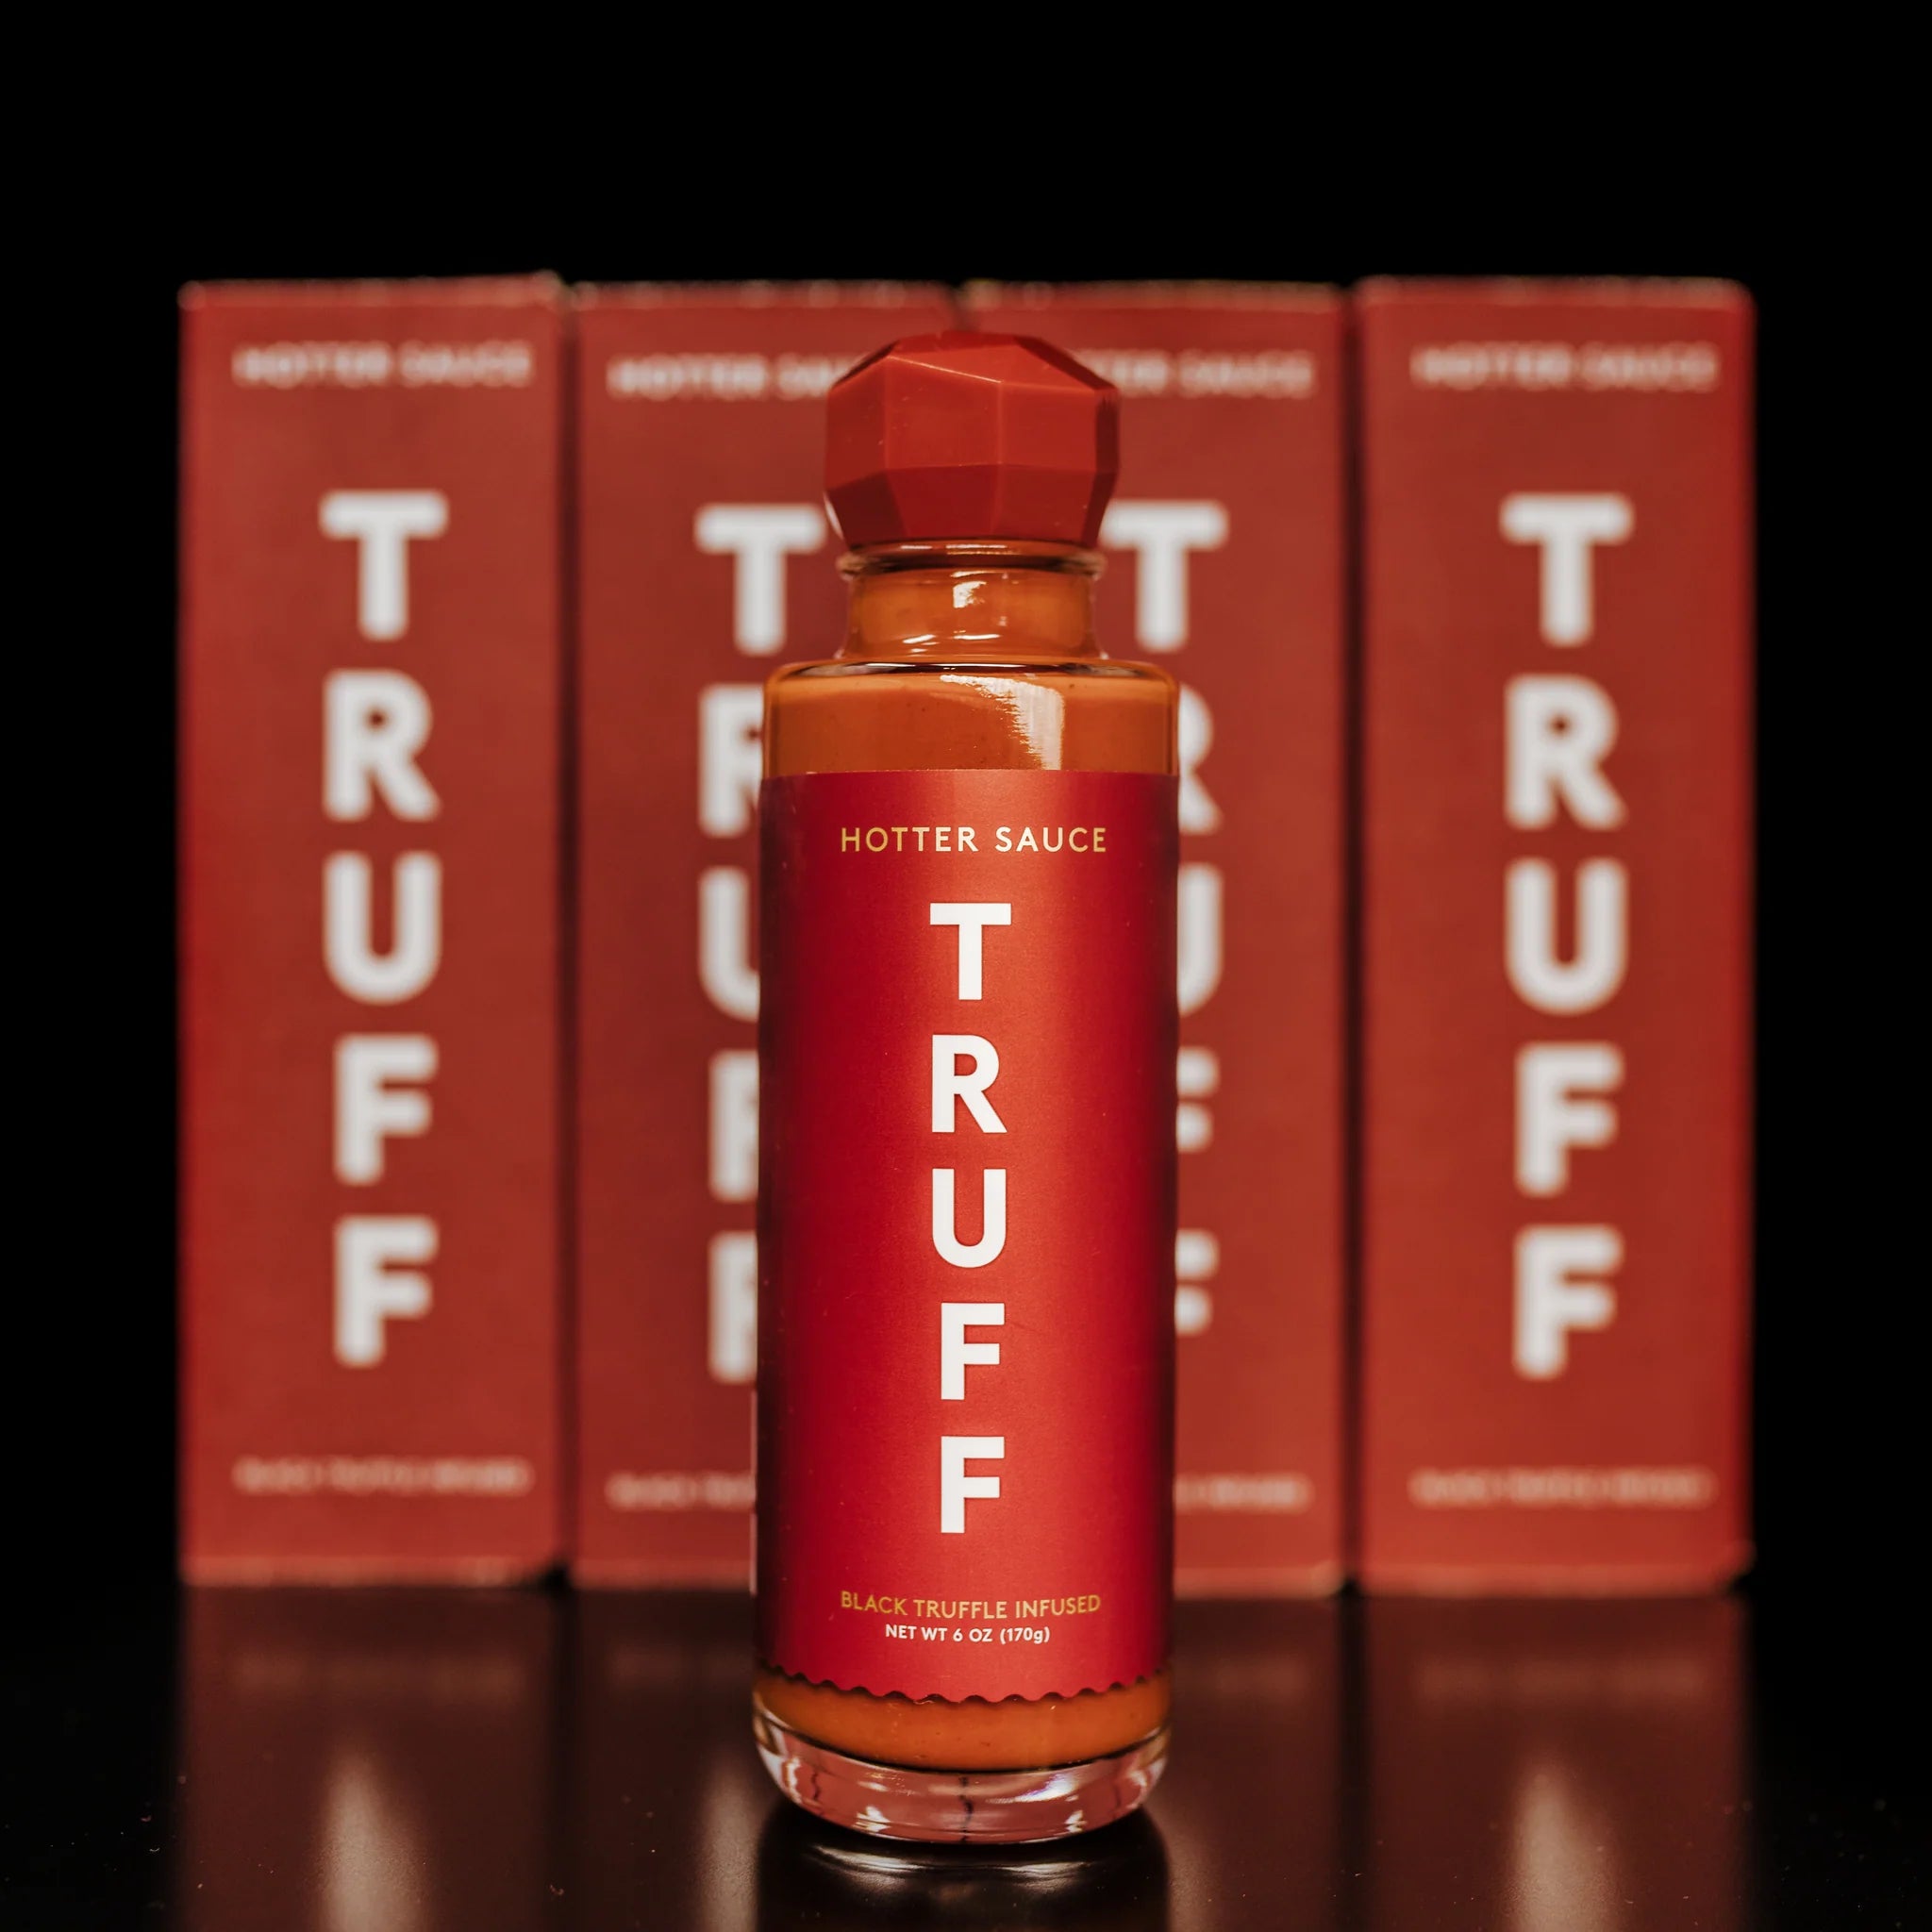 Truff Hotter Sauce Bottle with Truff Boxes in the background